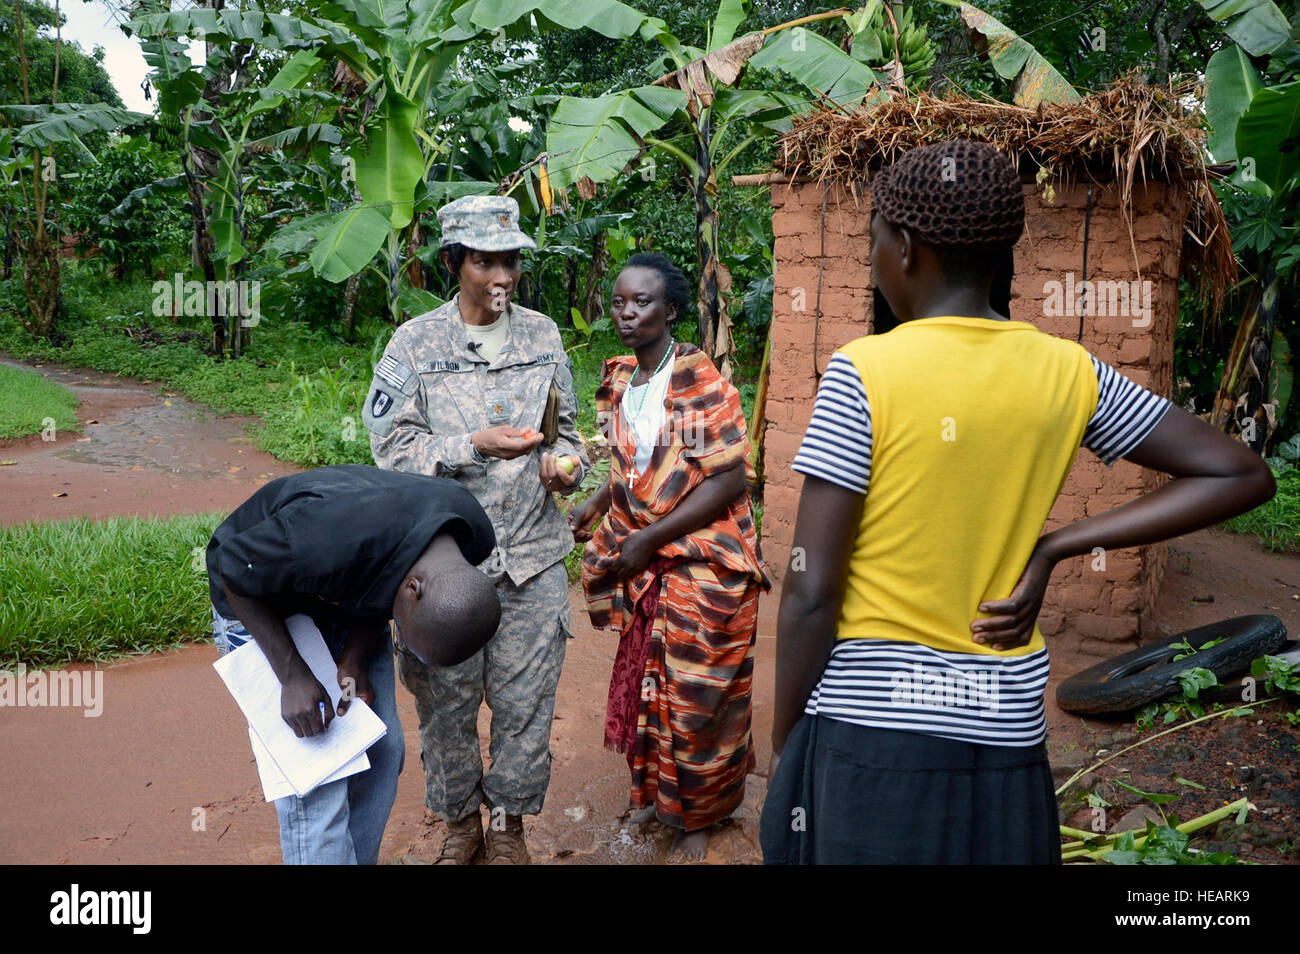 U.S. Army Maj. Daisy Wilson, a public health nurse with the 411th Civil Affairs Battalion, Combined Joint Task Force-Horn of Africa, pulls key health assessment information from community leader Nalubwma Vincent and family as Ugandan veterinarian Dr. Douglas Kibuuka, Bombo, records findings during a site survey of dozens of homes in the remote village of Kakute, site of the world's last Ebola breakout in November. The human and animal health care team is part of One Health, a two-week whole-of-government program that strengthens Uganda's healthcare and counterbioterrorism capabilities and reco Stock Photo